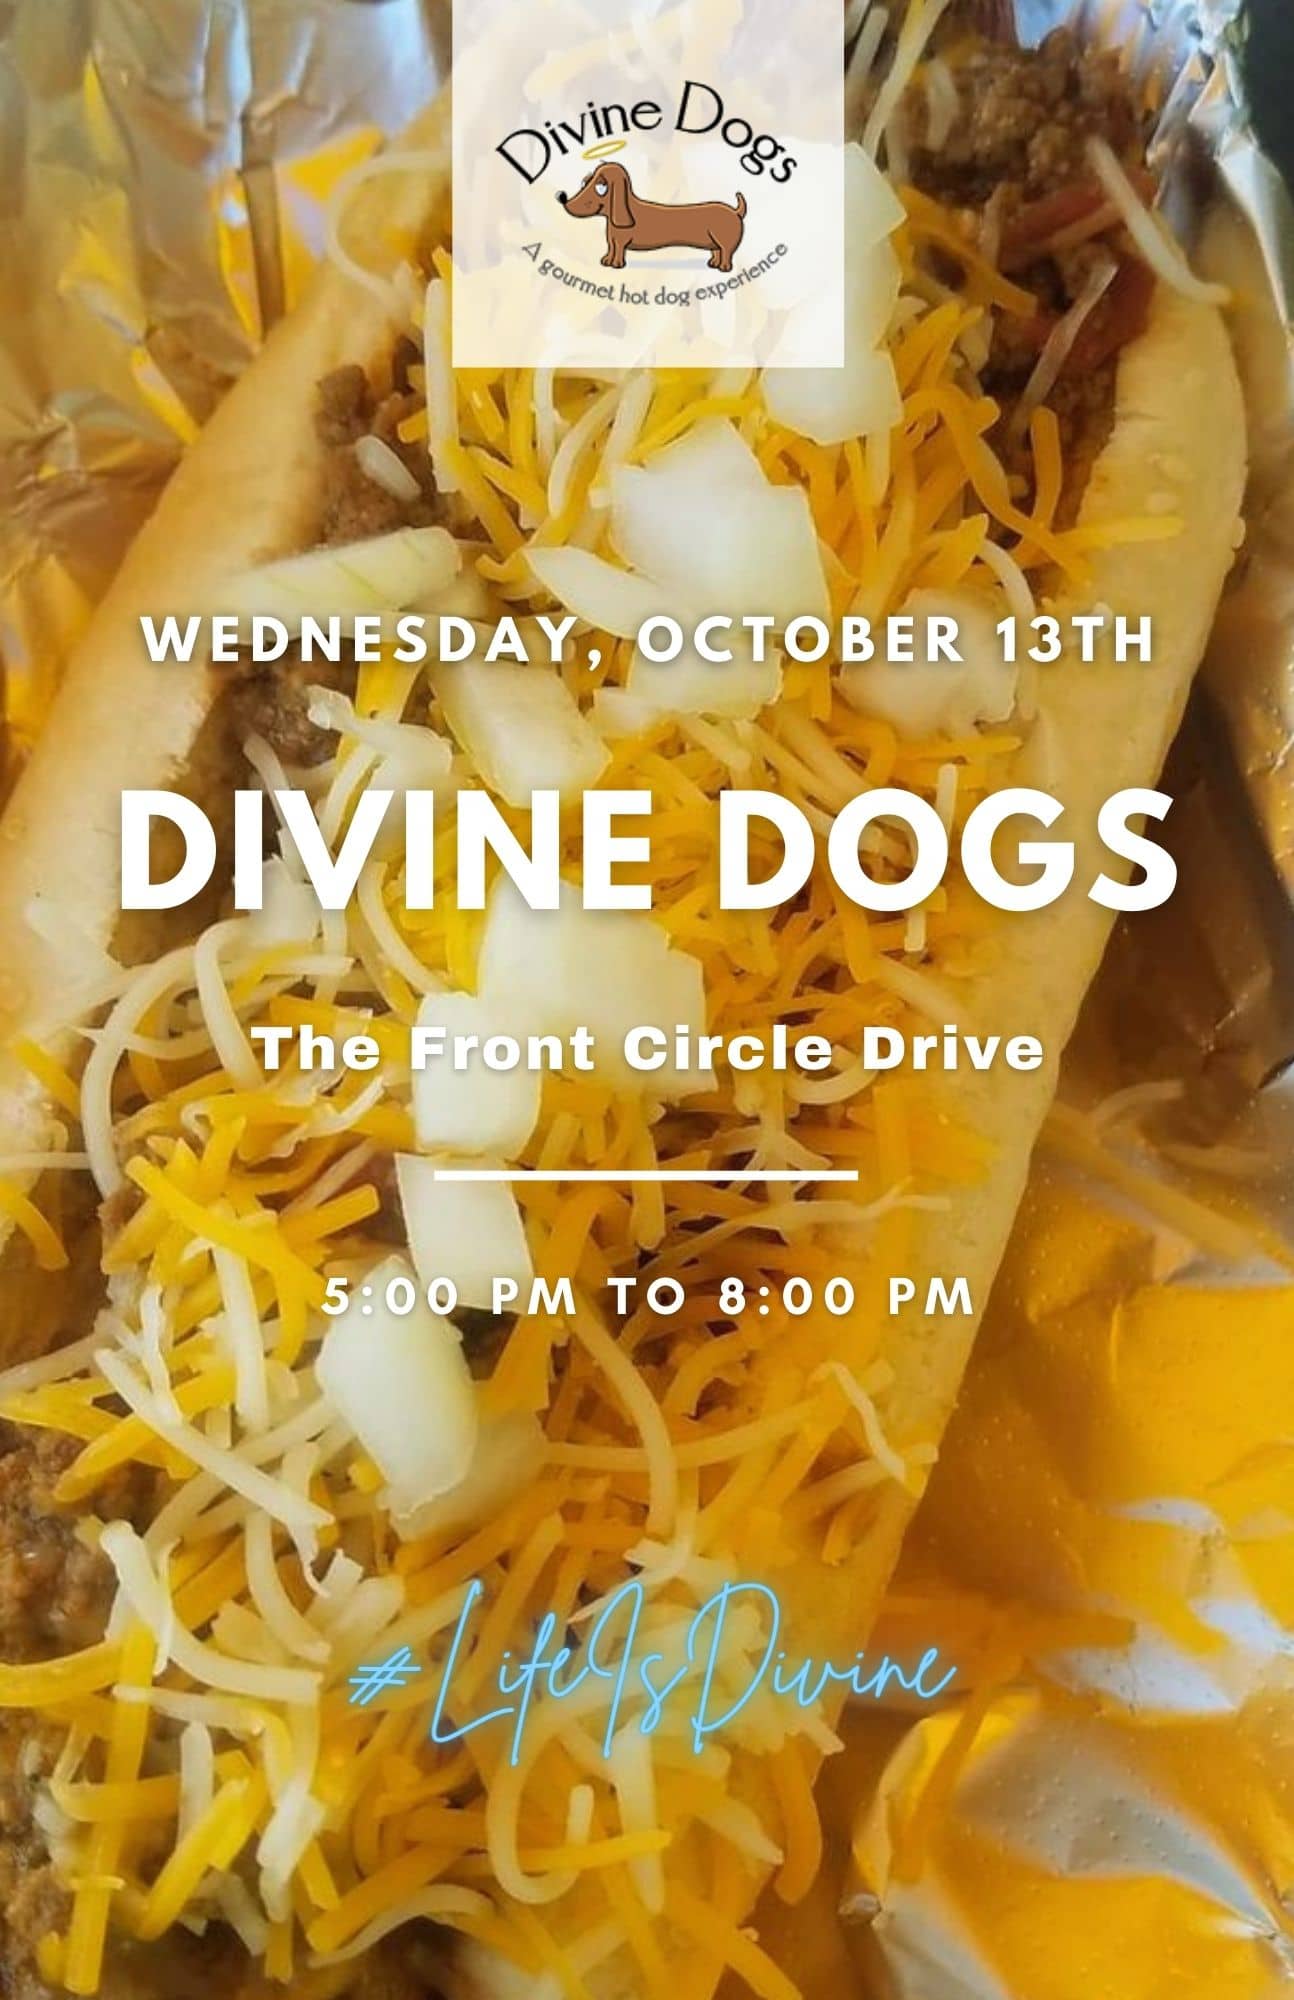 Divine dogs grace the front circle drive.